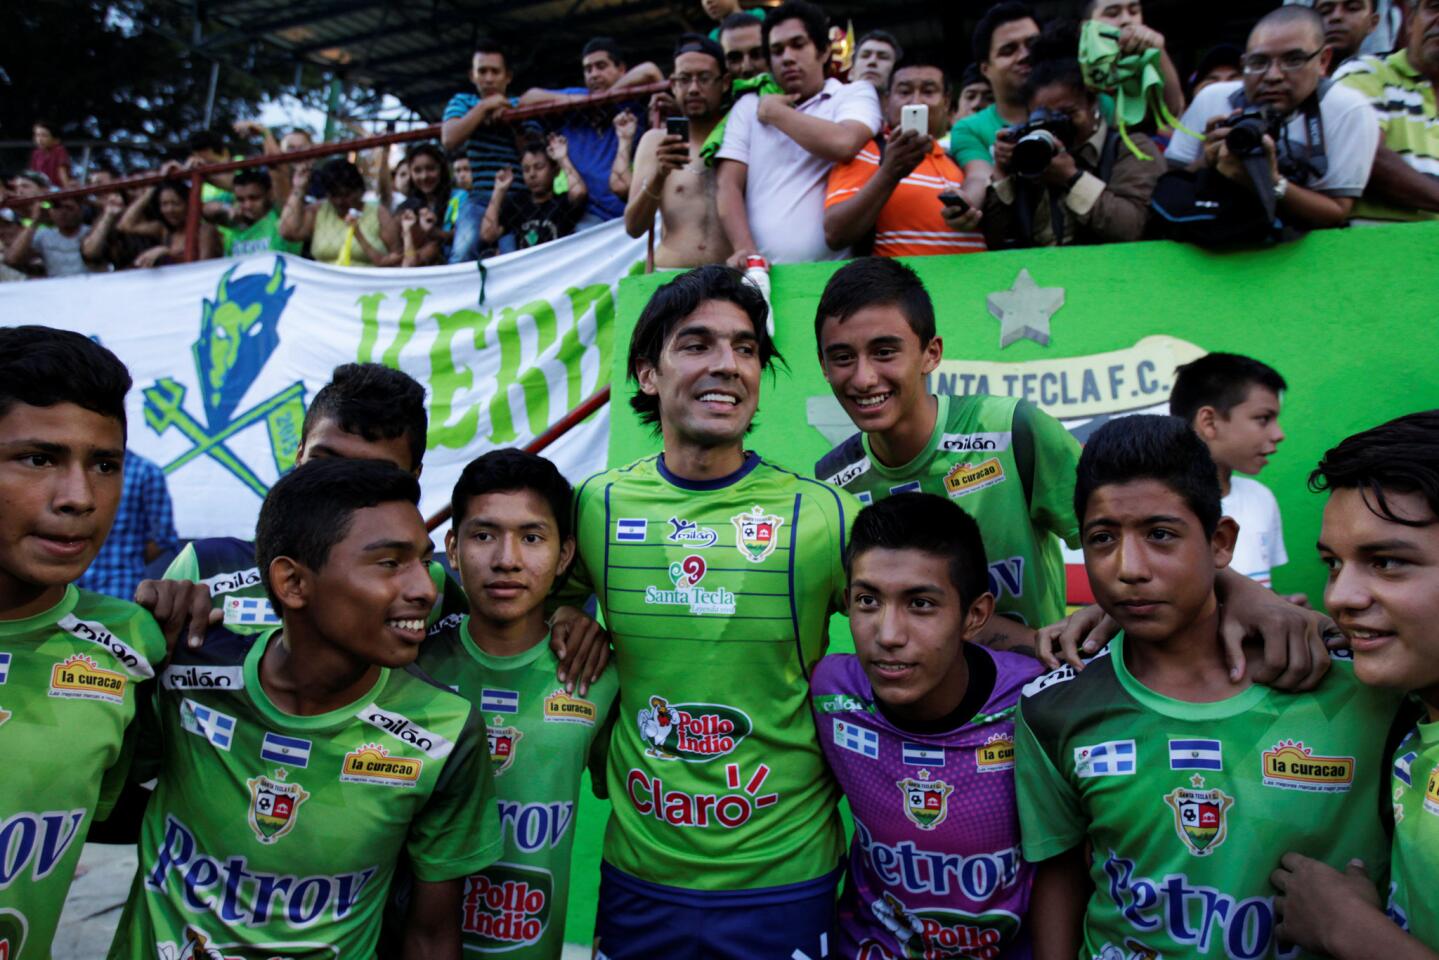 Uruguayan soccer player Sebastian "El Loco" Abreu pose for a photo with fans during his presentation with new club Santa Tecla F.C. in Santa Tecla, El Salvador, July 6, 2016. REUTERS/Jose Cabezas ** Usable by SD ONLY **